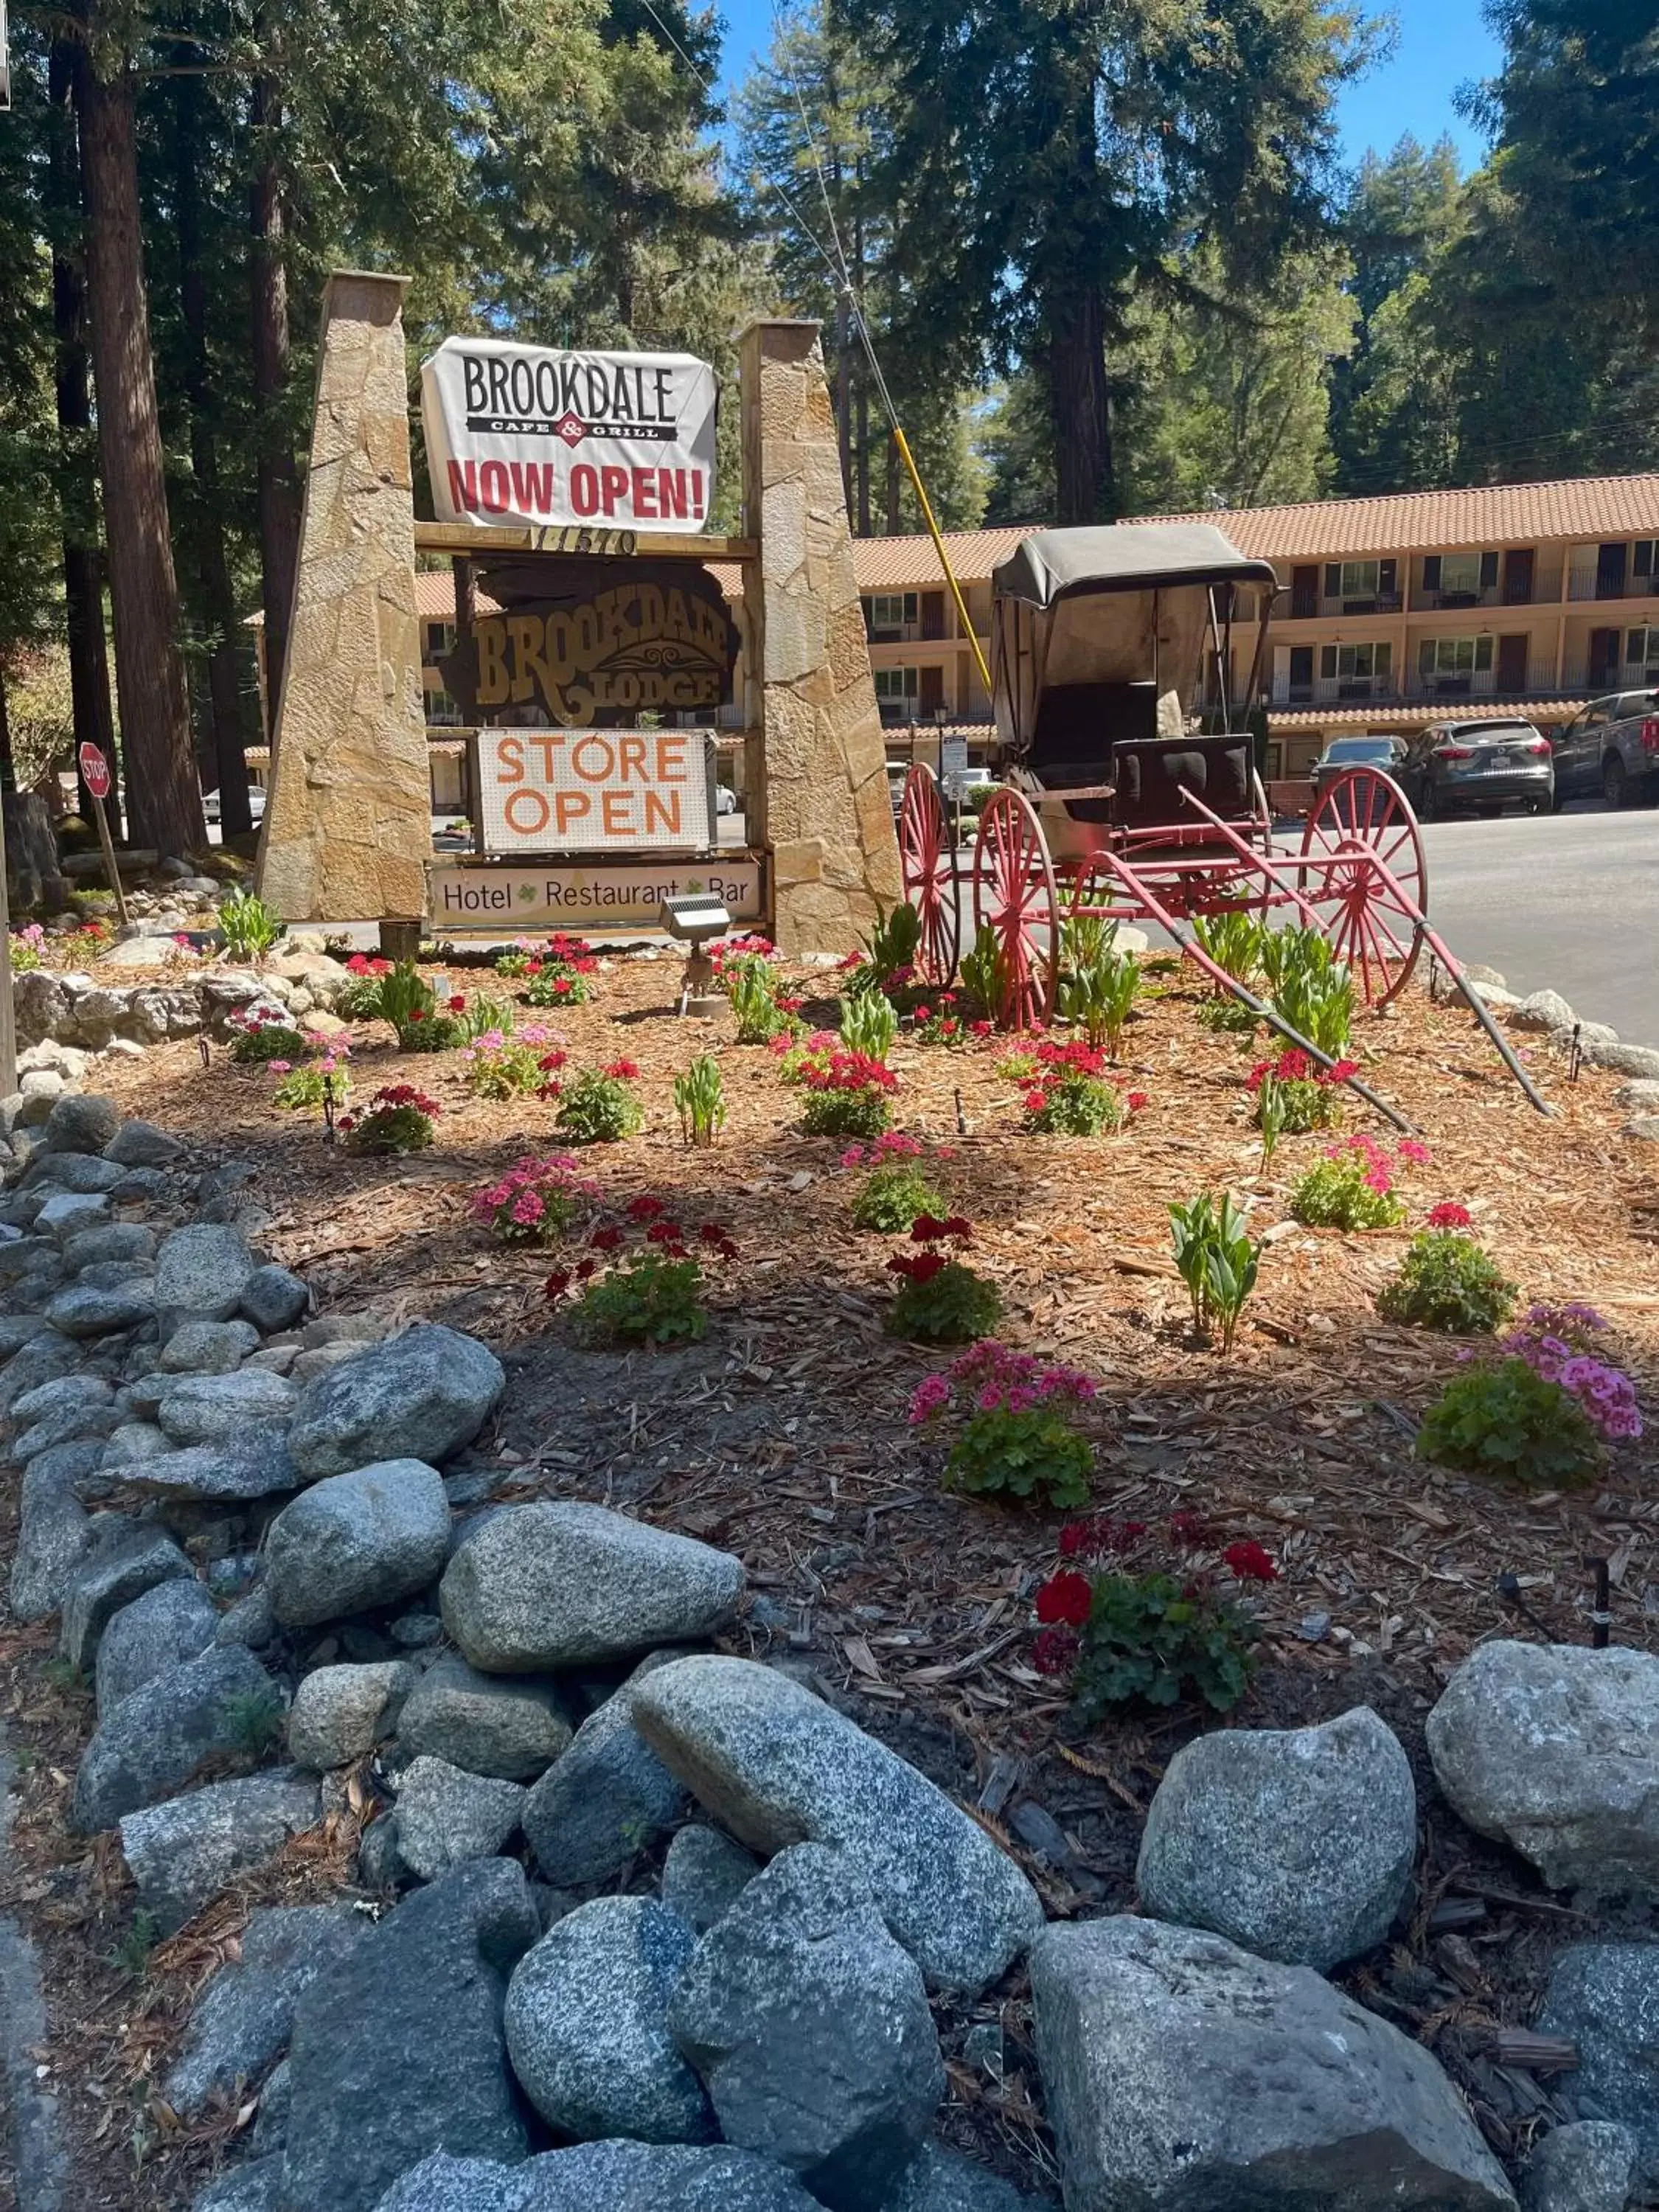 Property logo or sign in The Historic Brookdale Lodge, Santa Cruz Mountains